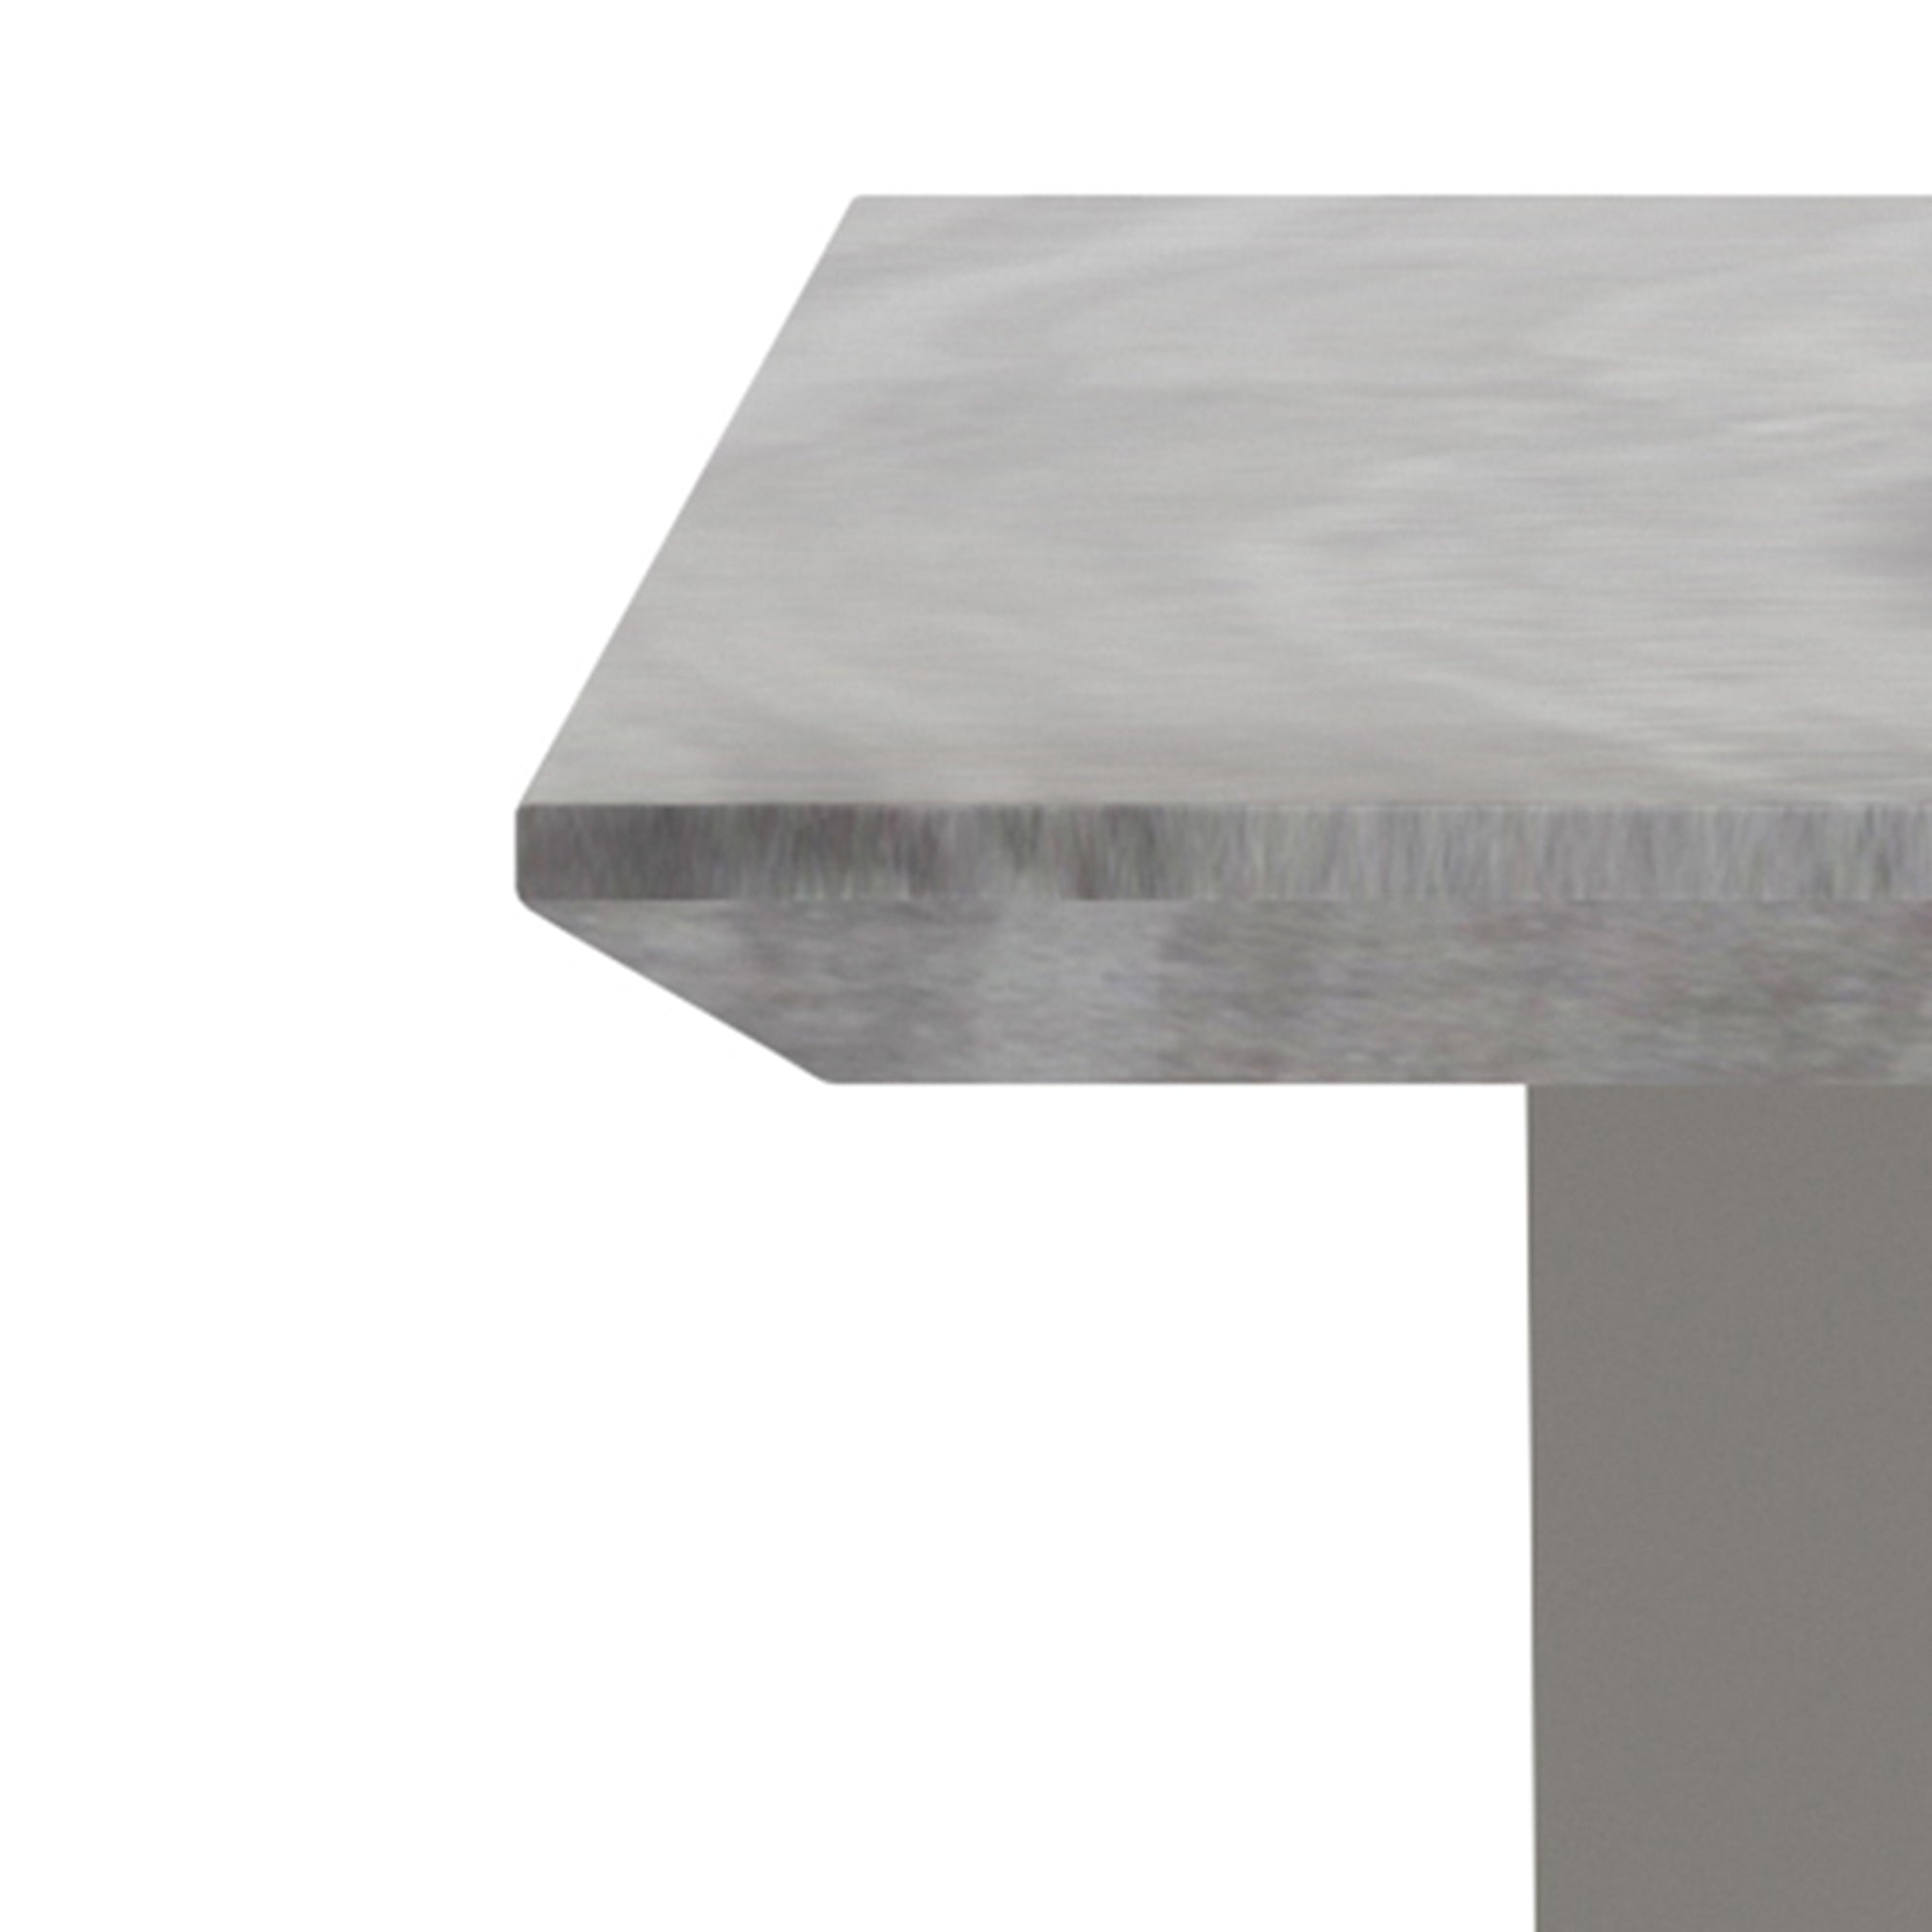 Napoli Console Table in Light Grey 502-545GY